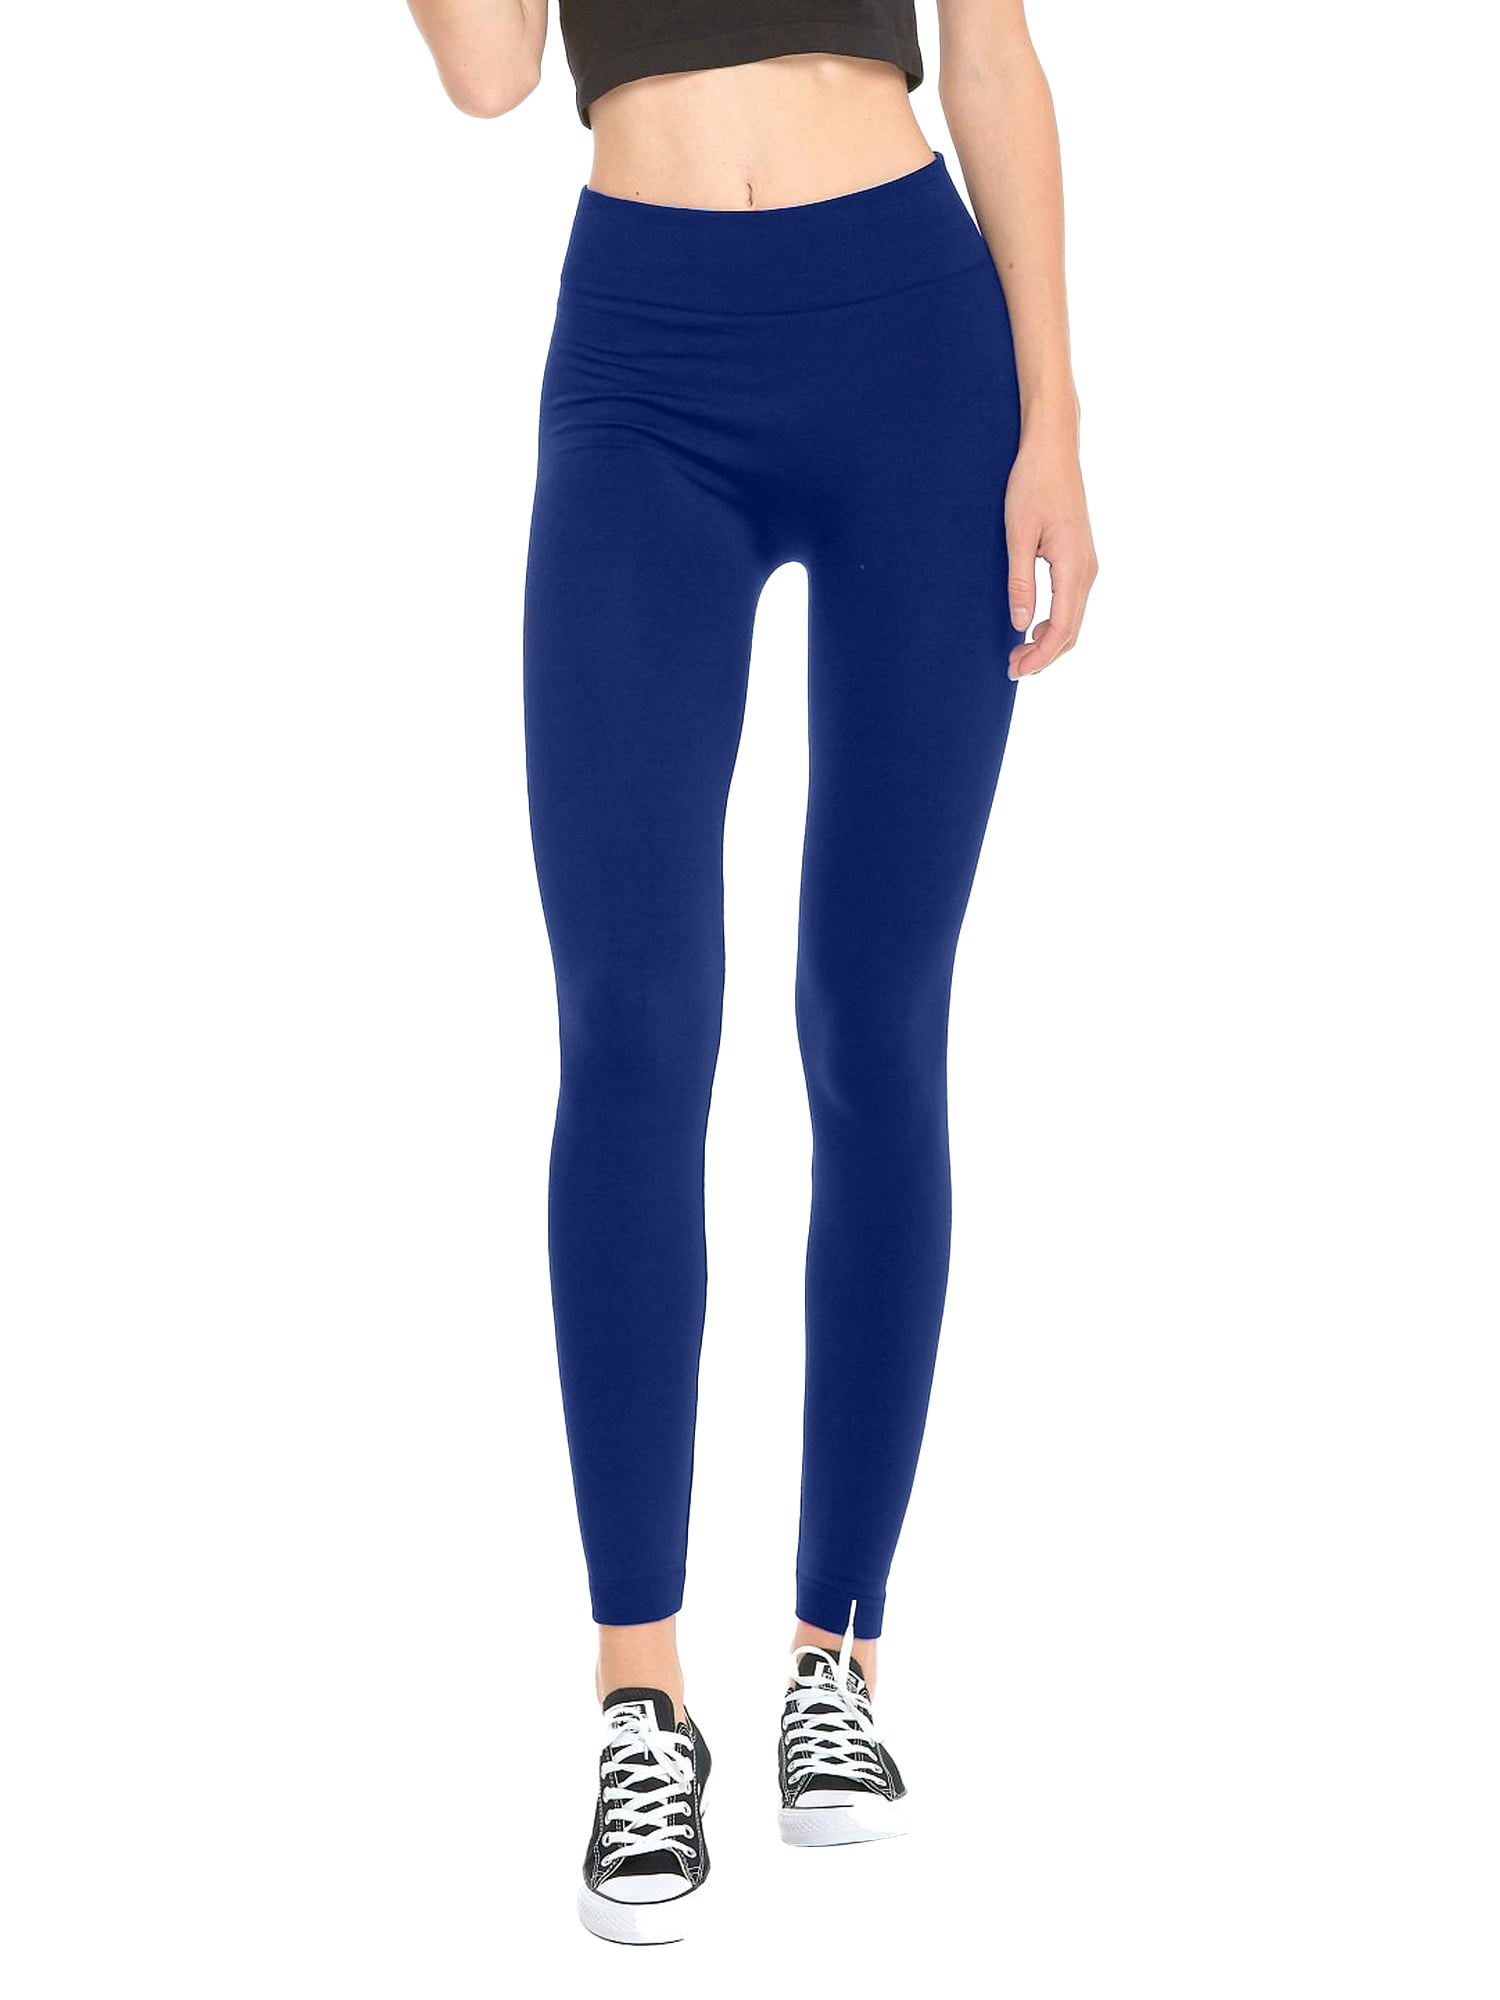 Cotton Comfort Lady Ladies Navy Blue Plain Legging, Size: Available In XL, XXL and XXXL at Rs 230 in Thane